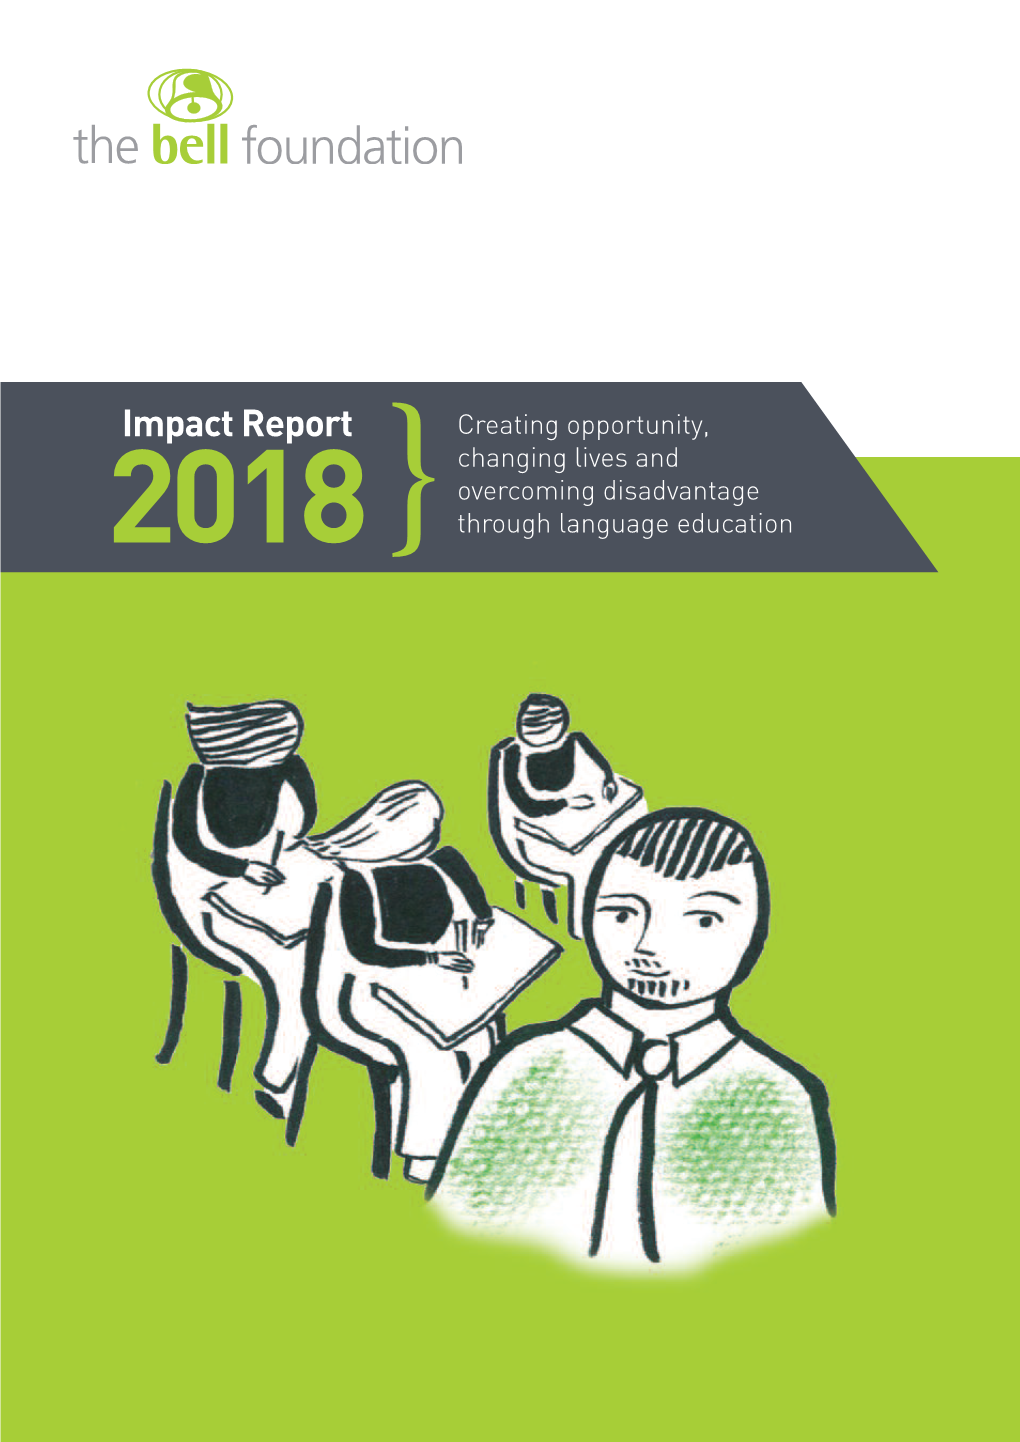 Impact Report Creating Opportunity, Changing Lives and Overcoming Disadvantage 2018 } Through Language Education the BELL FOUNDATION – IMPACT REPORT 2018